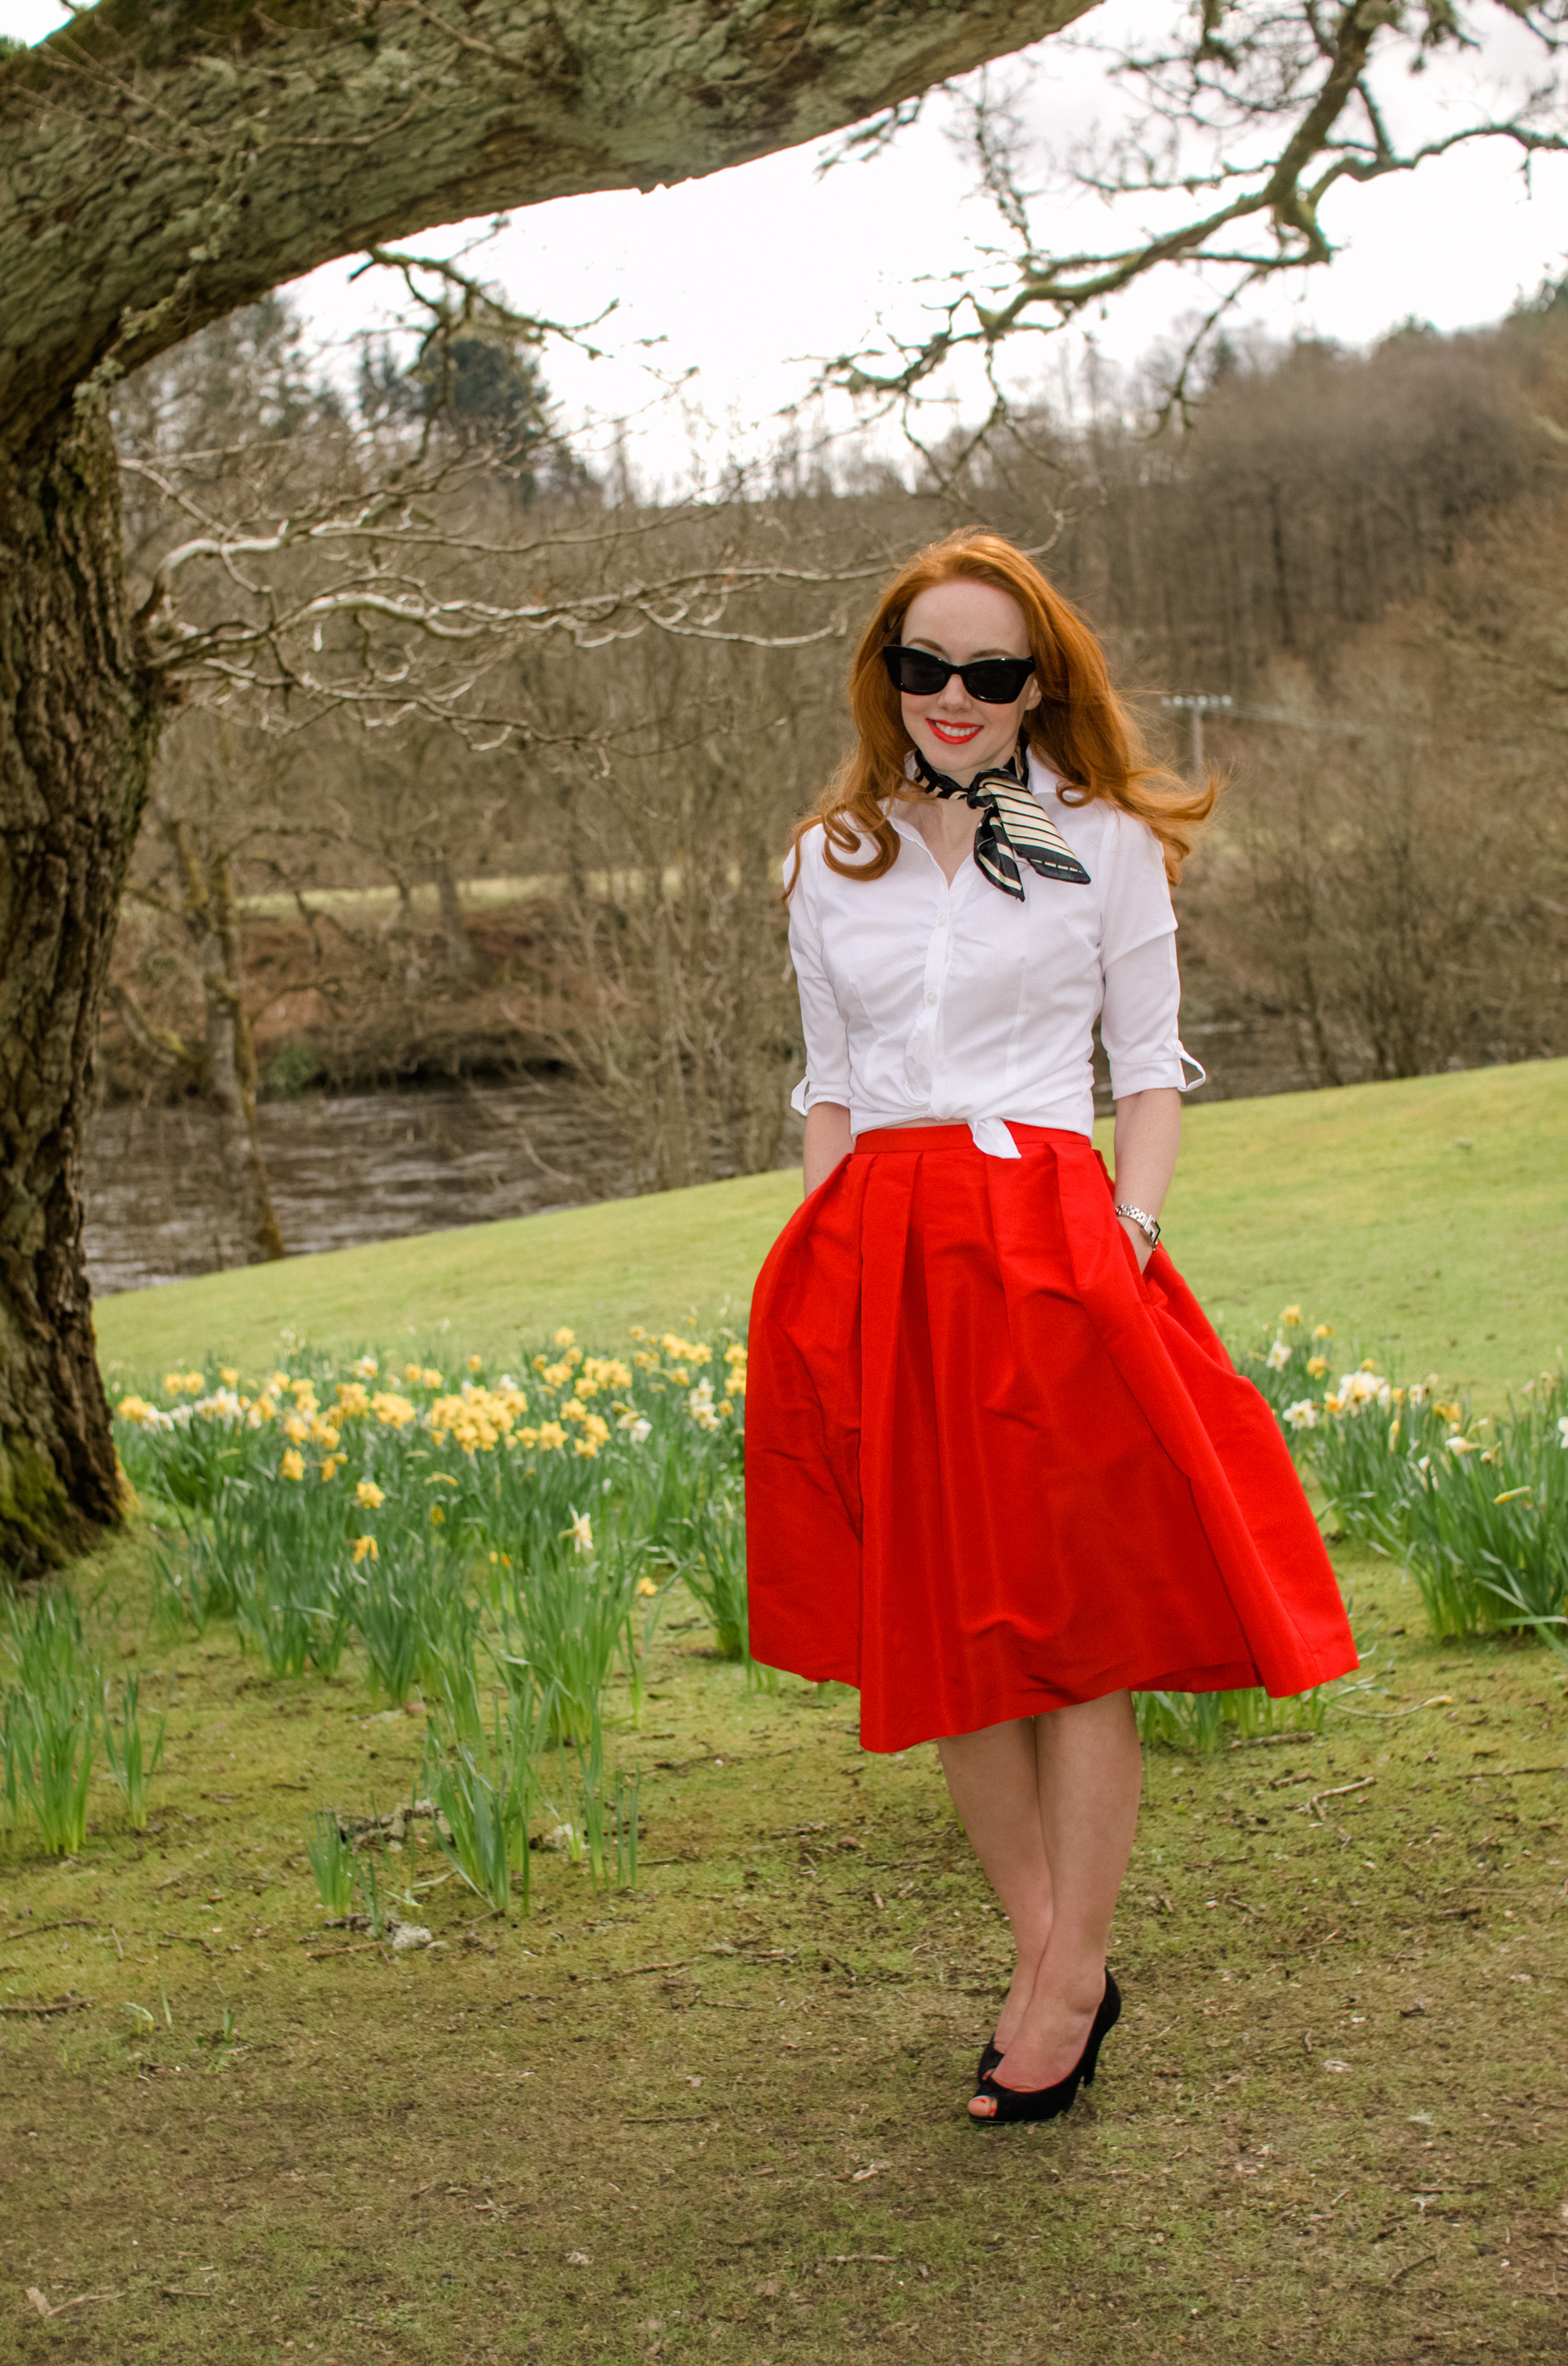 retro inspired outfit featuring full red skirt and white knotted shirt